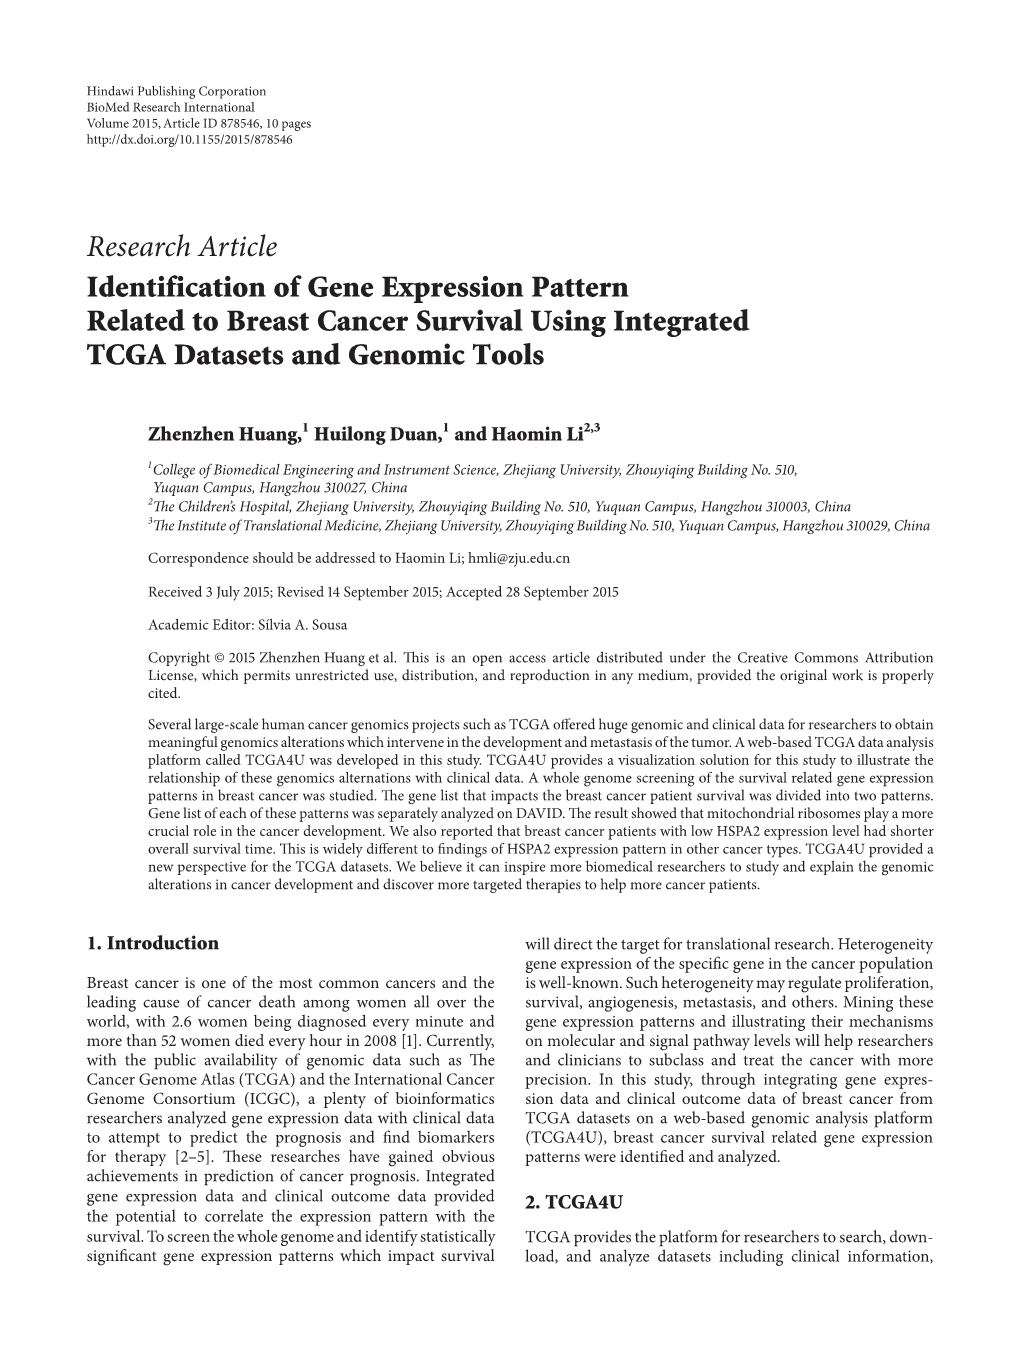 Identification of Gene Expression Pattern Related to Breast Cancer Survival Using Integrated TCGA Datasets and Genomic Tools